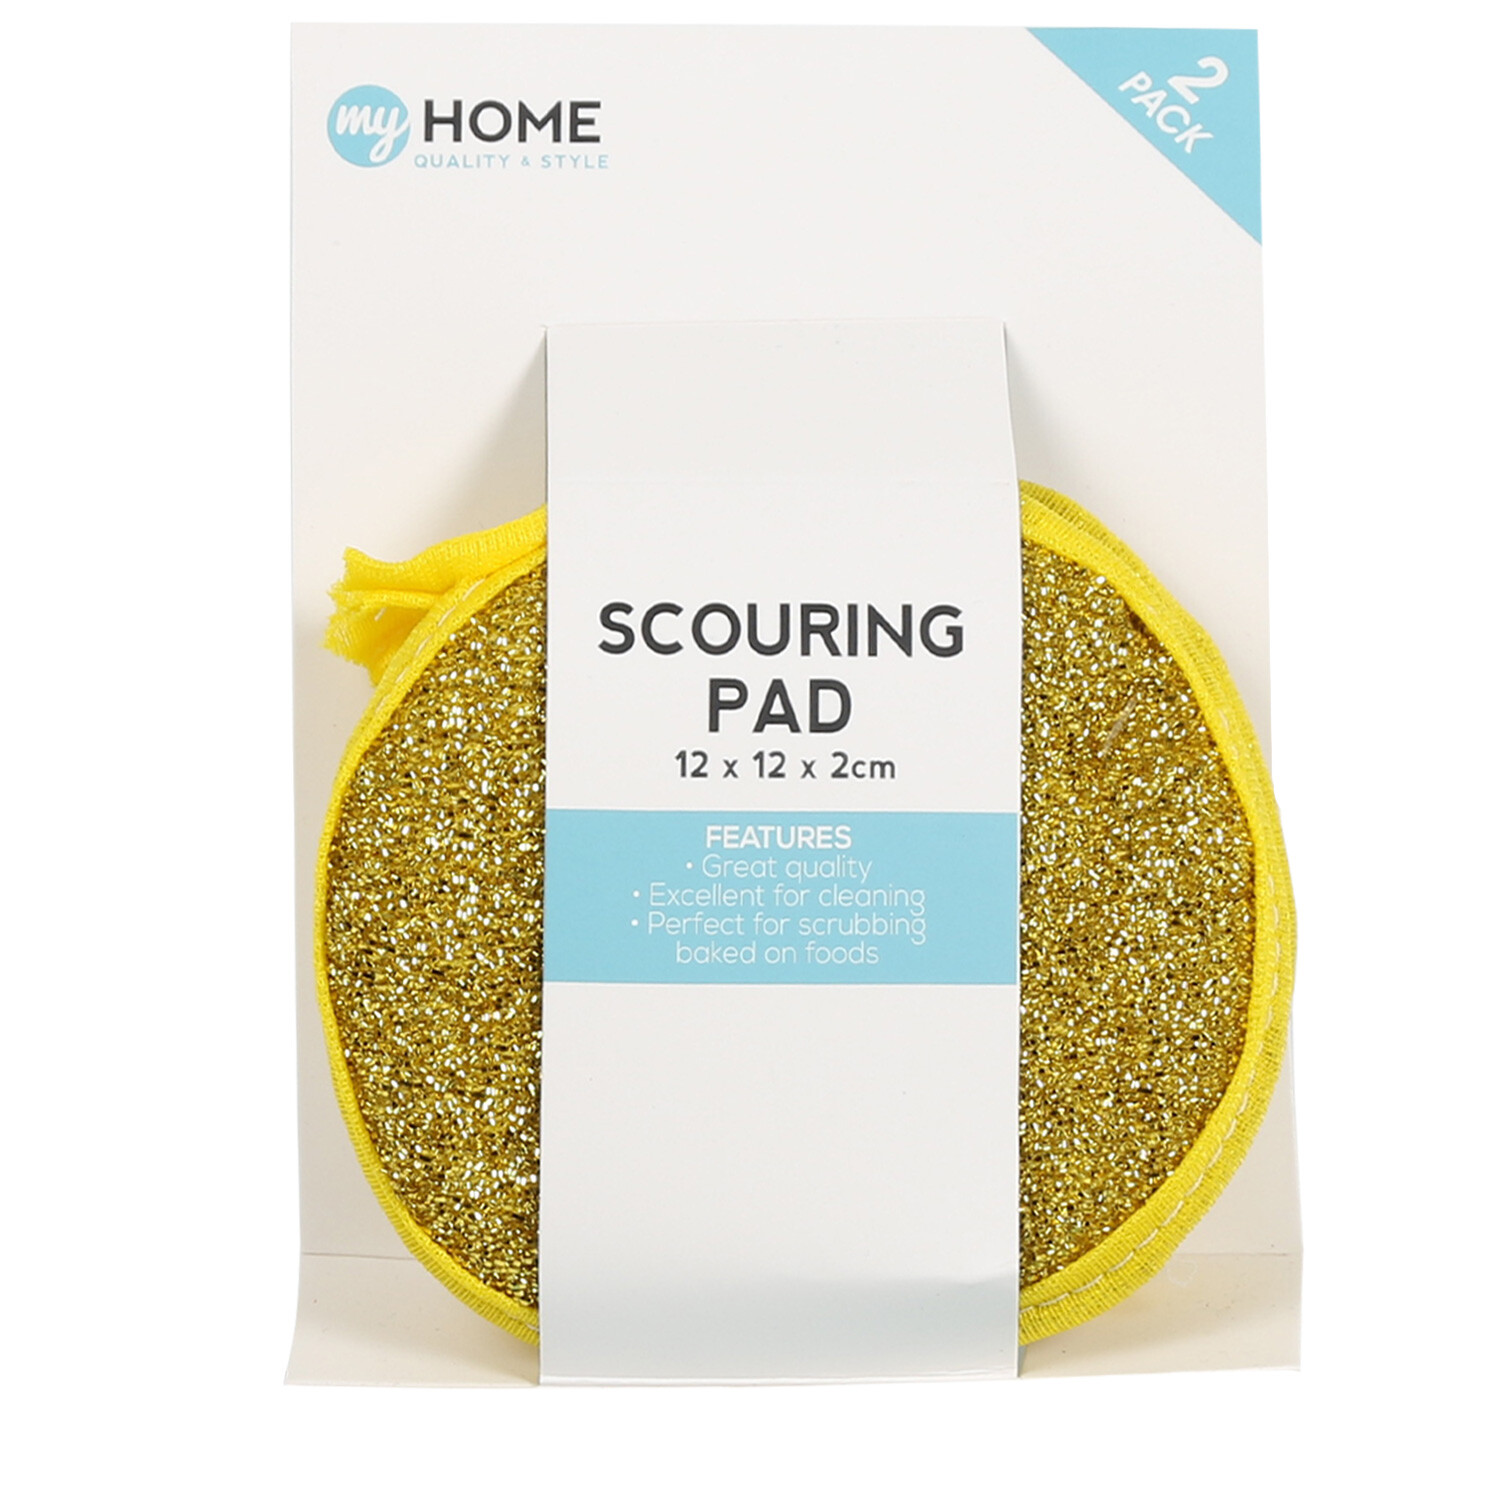 My Home Pack of 2 Scouring Pads - Yellow Image